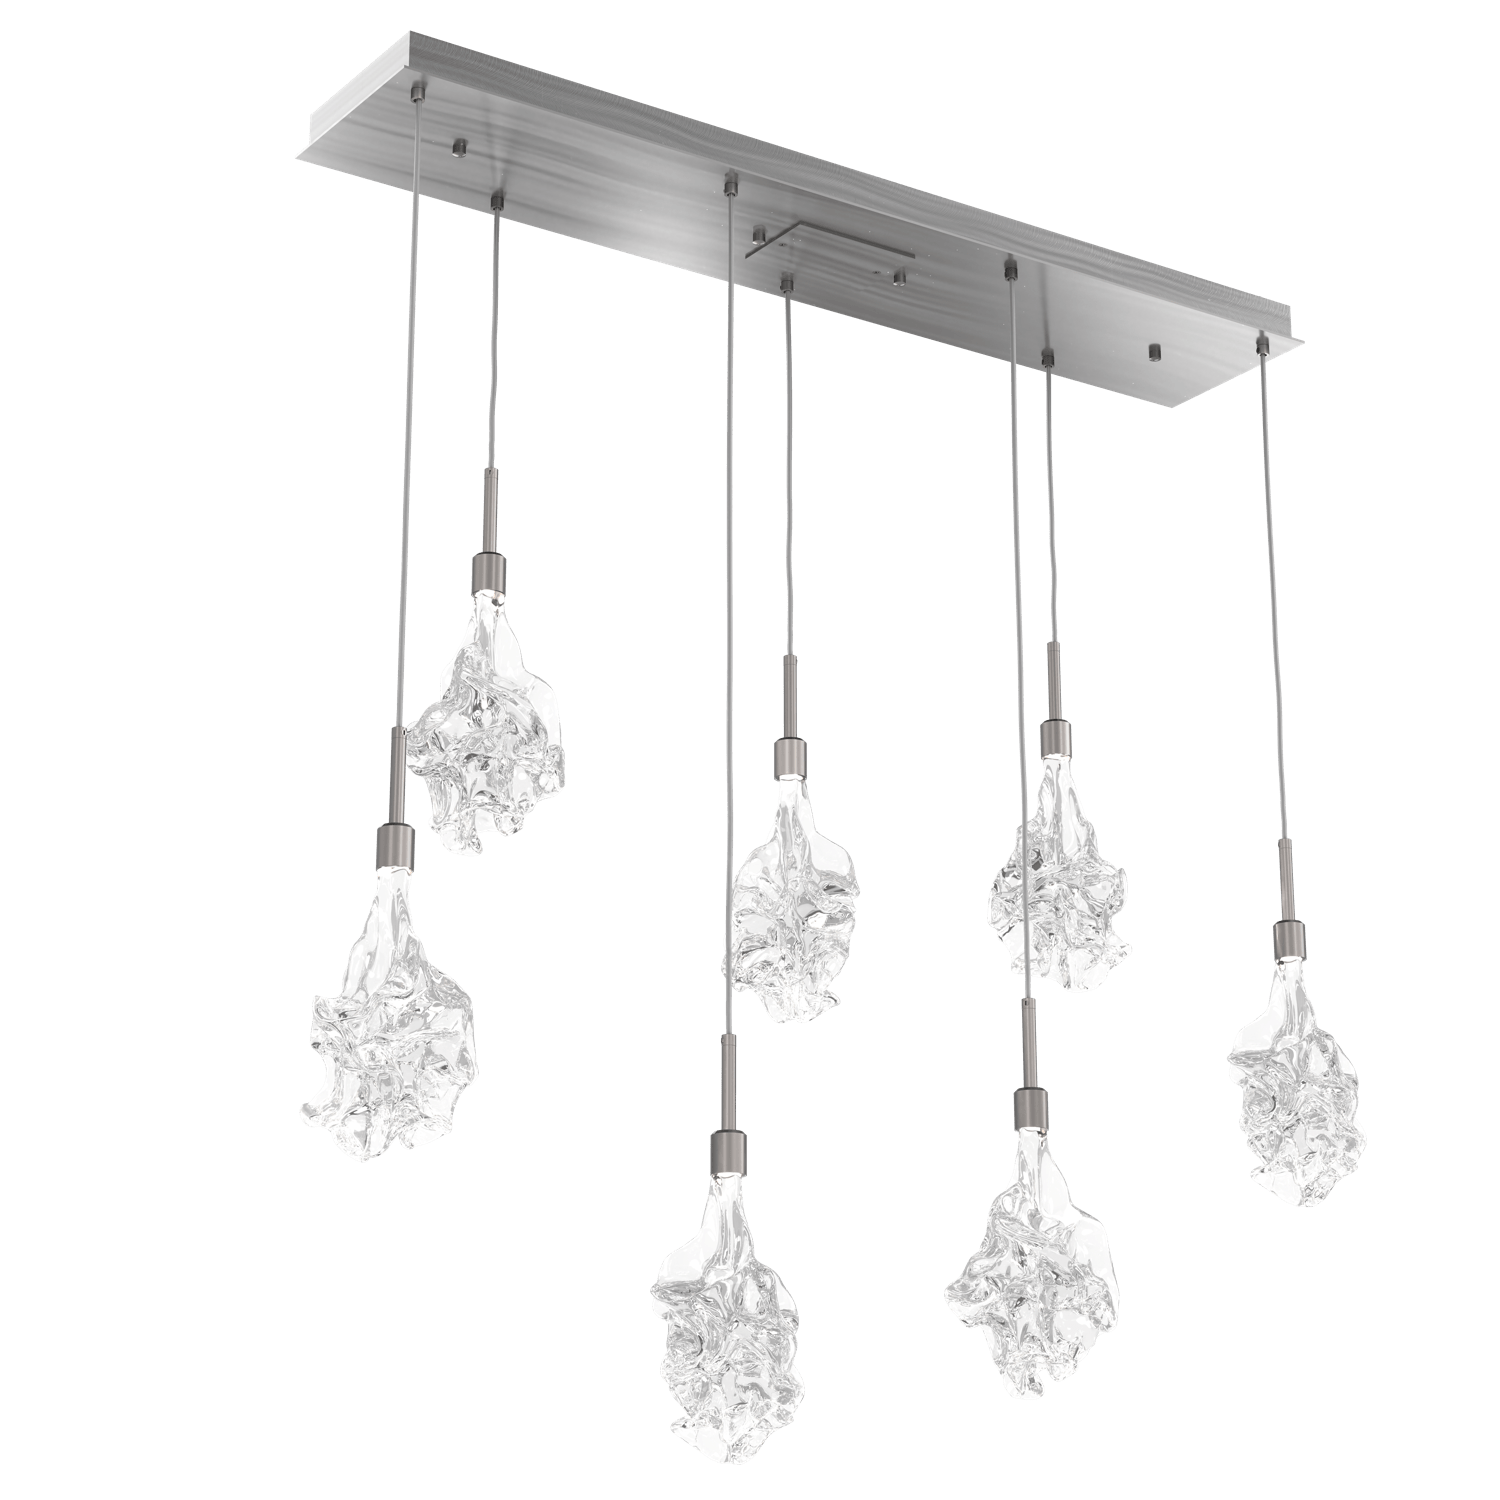 PLB0059-07-GM-Hammerton-Studio-Blossom-7-light-linear-pendant-chandelier-with-gunmetal-finish-and-clear-handblown-crystal-glass-shades-and-LED-lamping